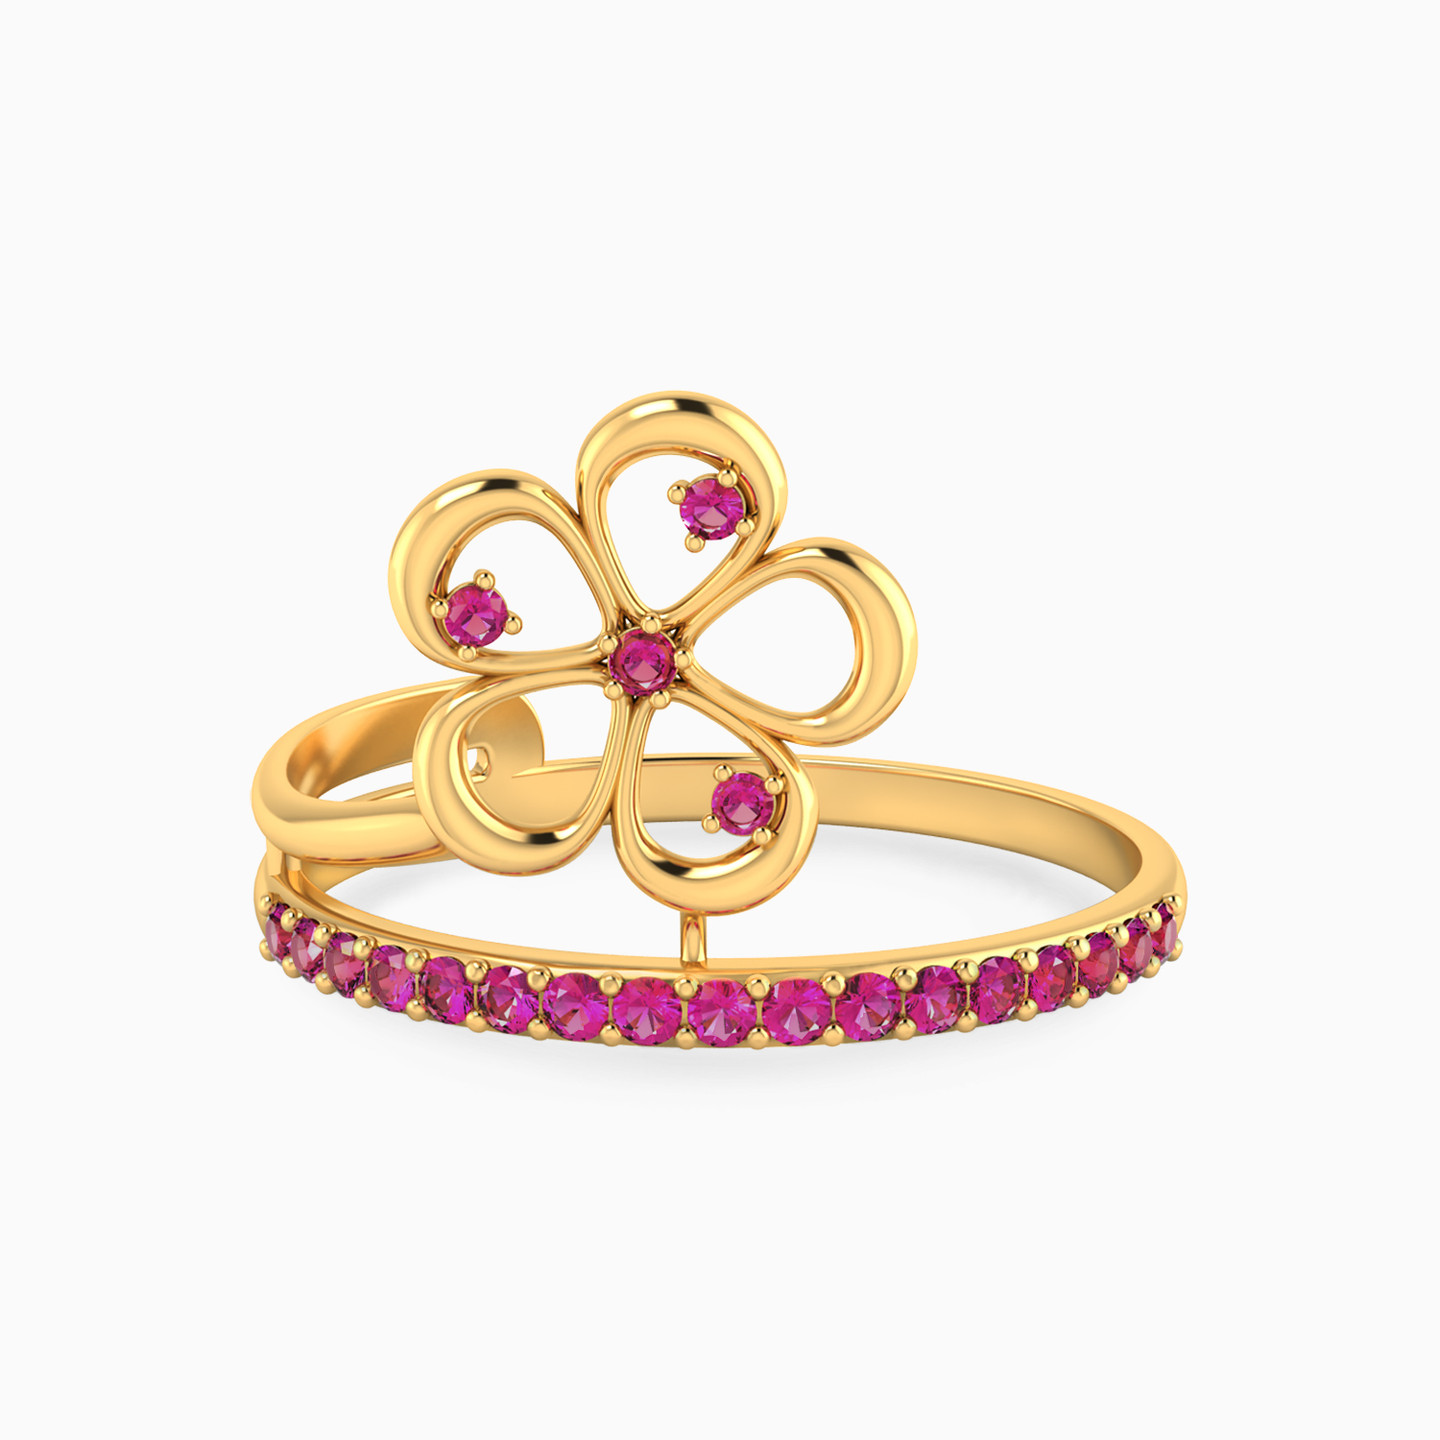 Flower Shaped Colored Stones Statement Ring in 18K Gold